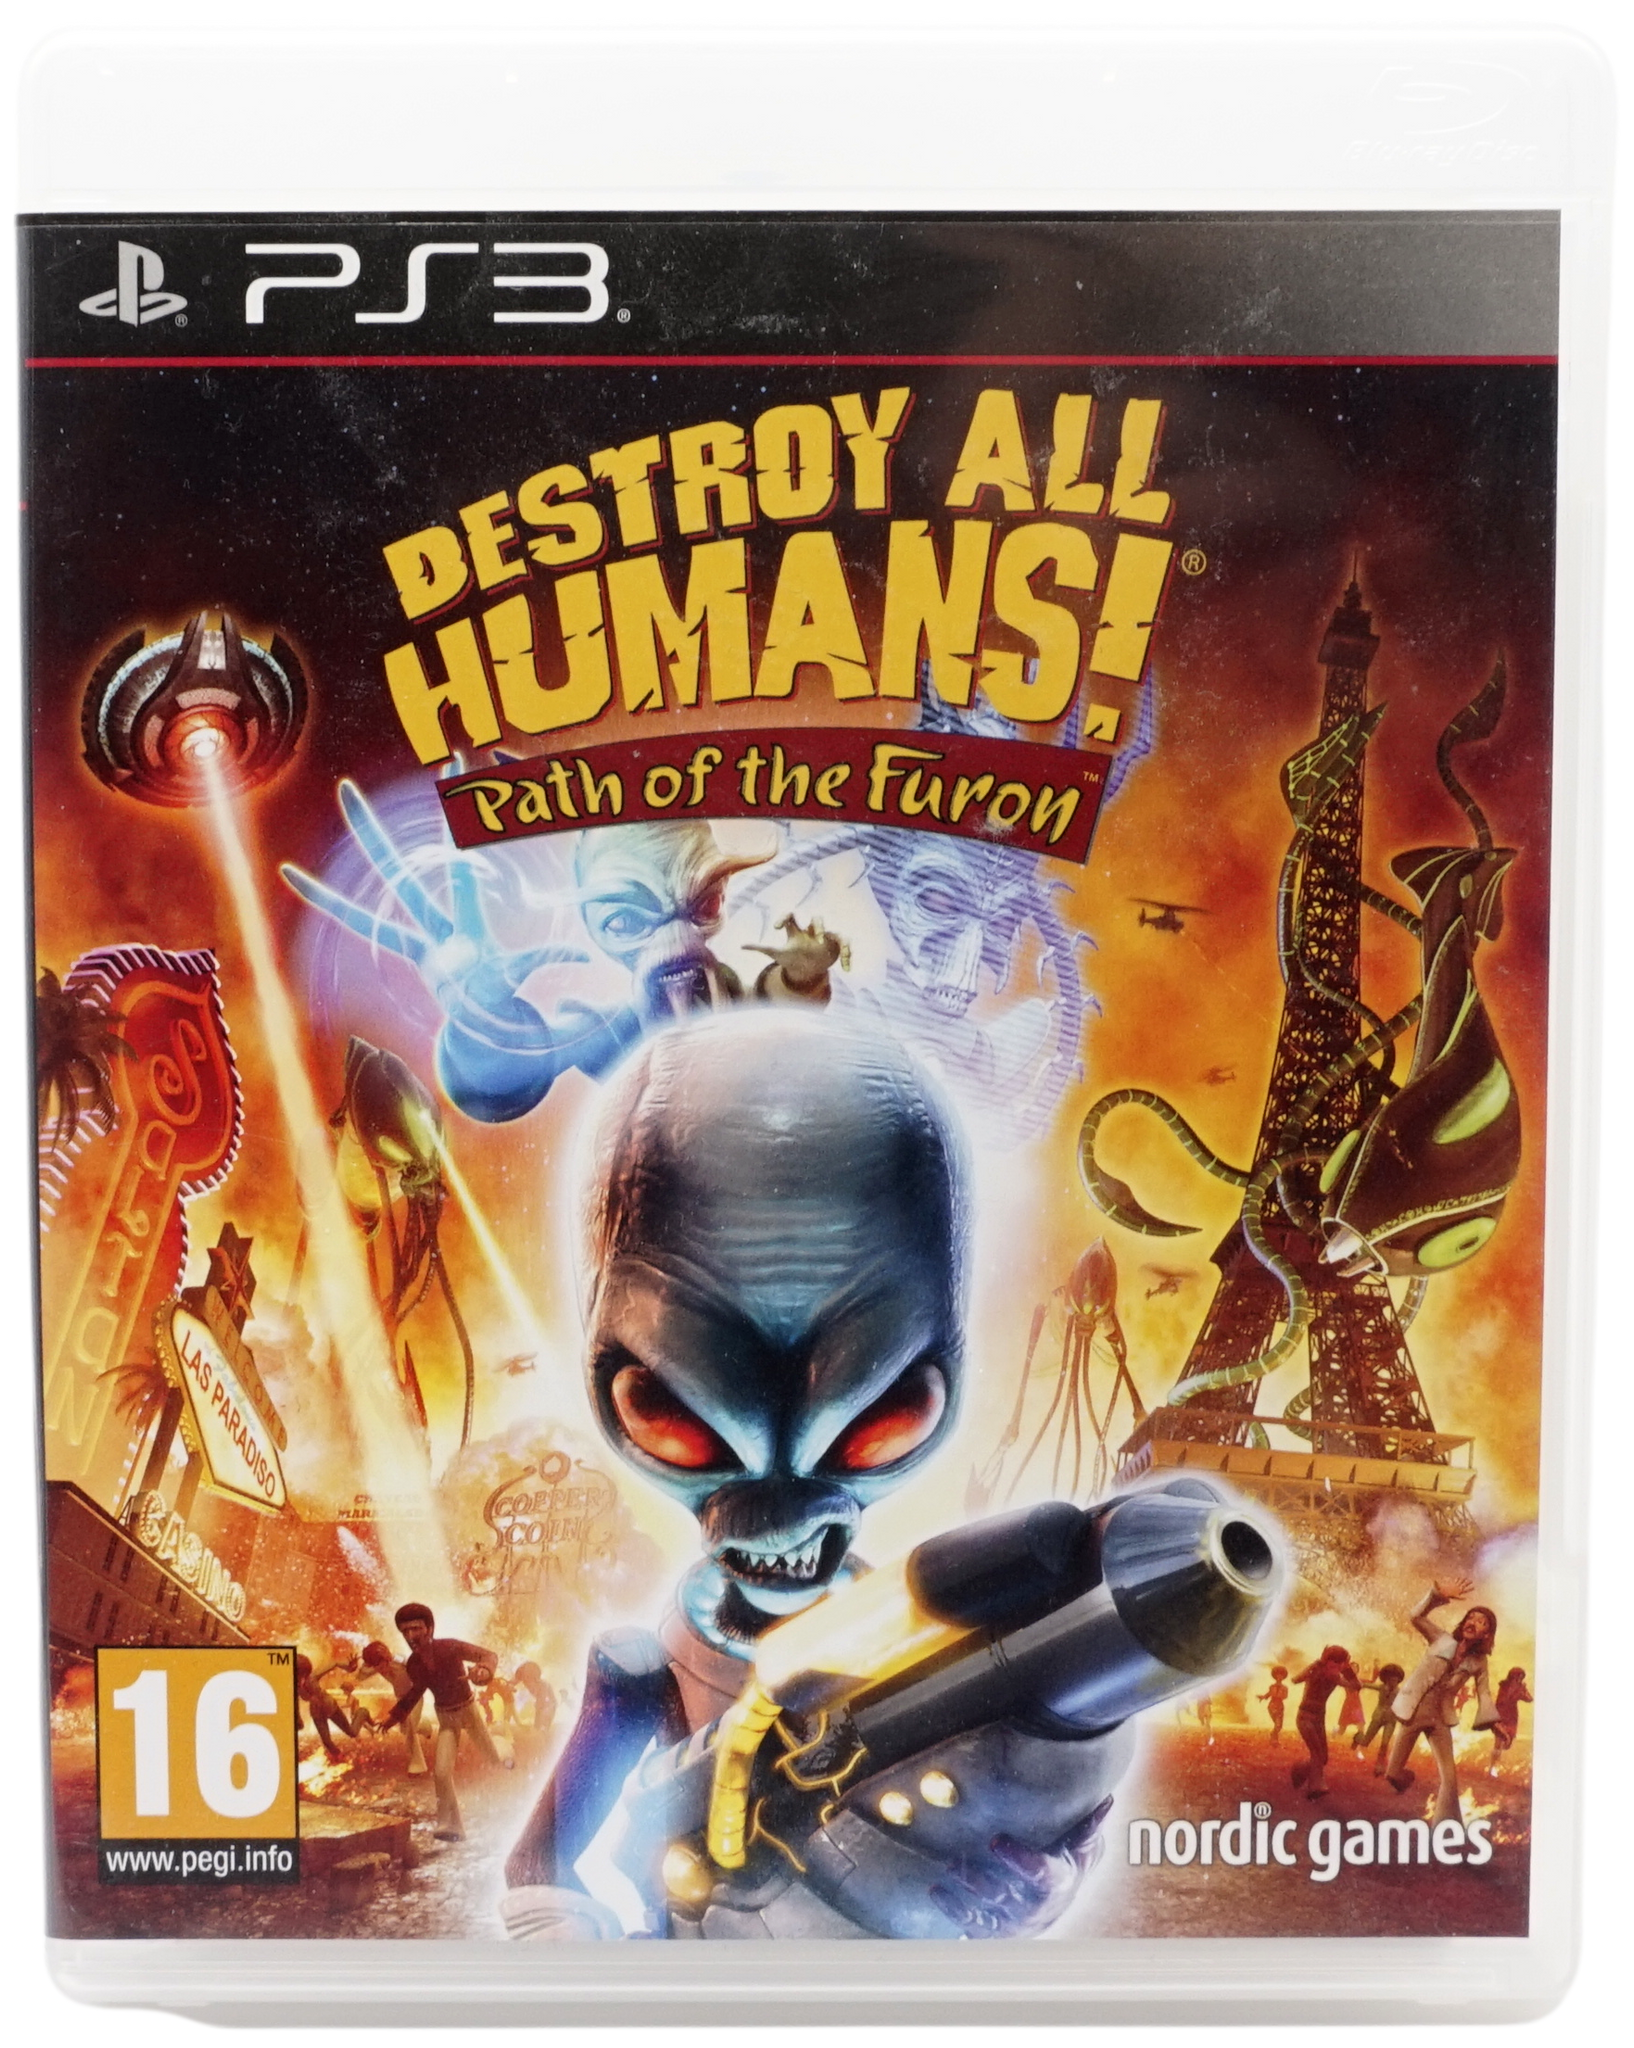 Destroy All Humans : Path of The Furon (PS3)